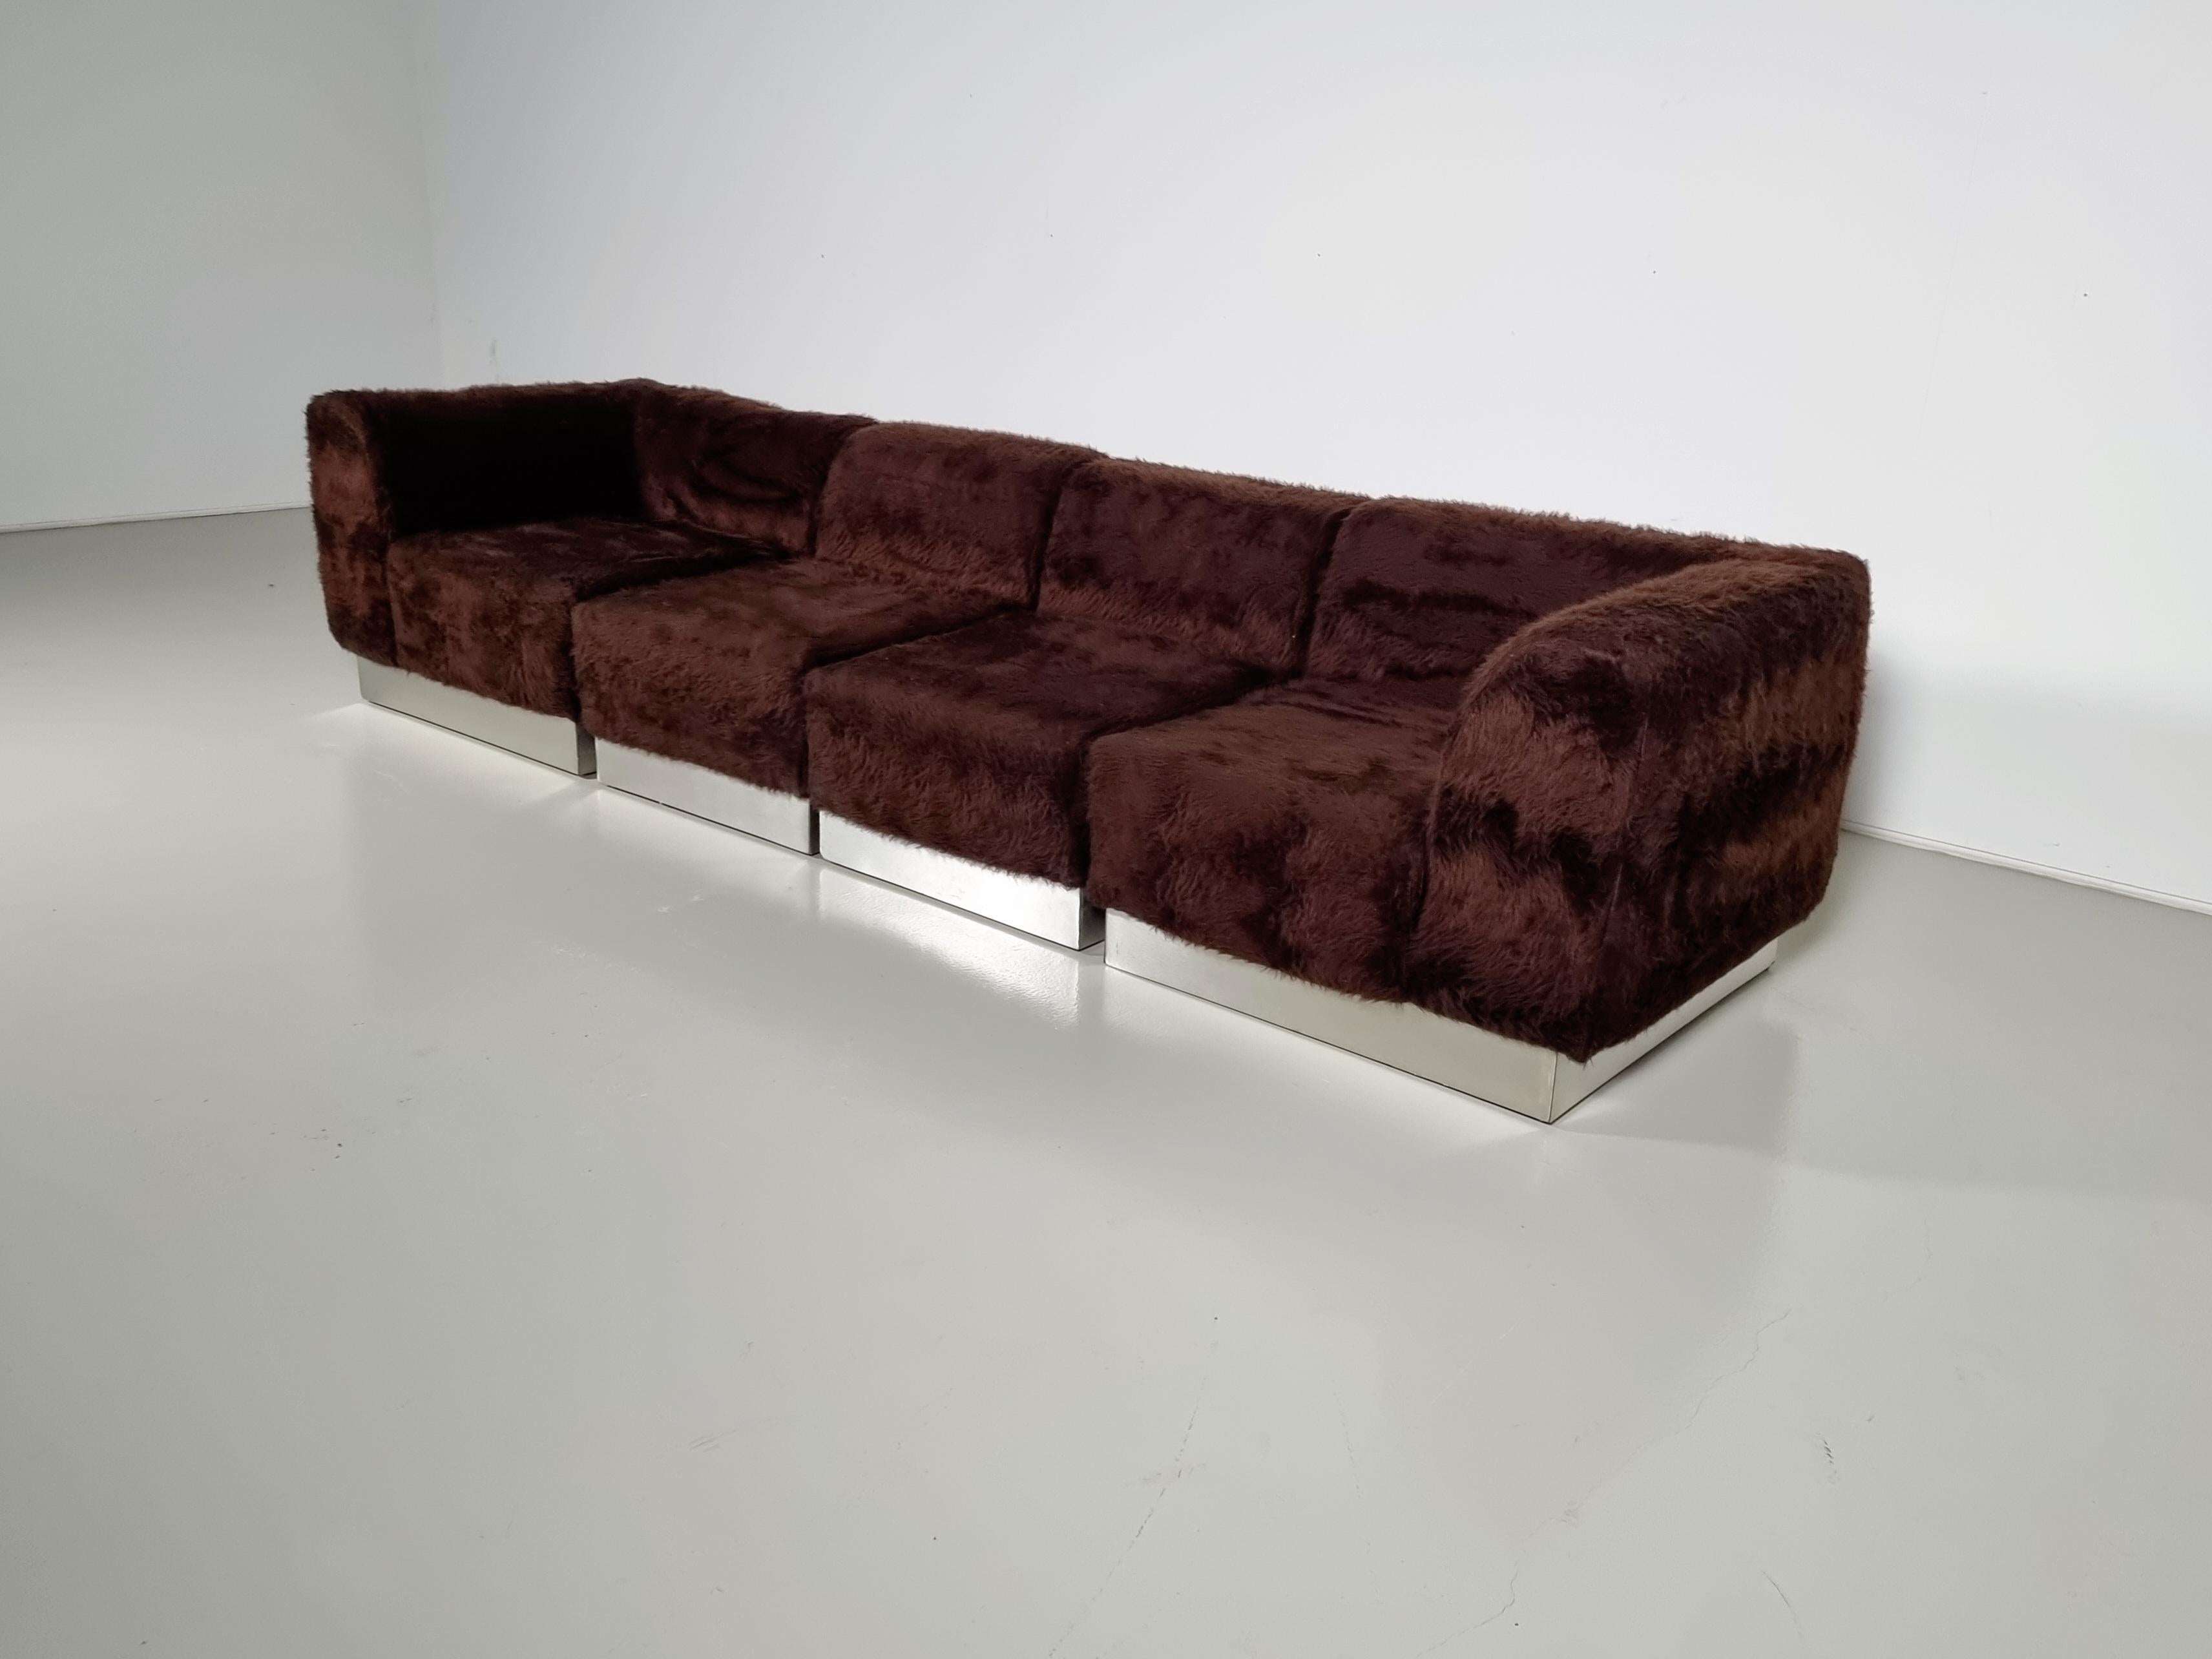 Vintage Italian sectional sofa, chrome plated, faux fur, the 1970s

It has a relaxed and easygoing appearance to match its comfort level. This design is a great addition to any sitting or lounge area. In the fabric, you can see a Missoni-like